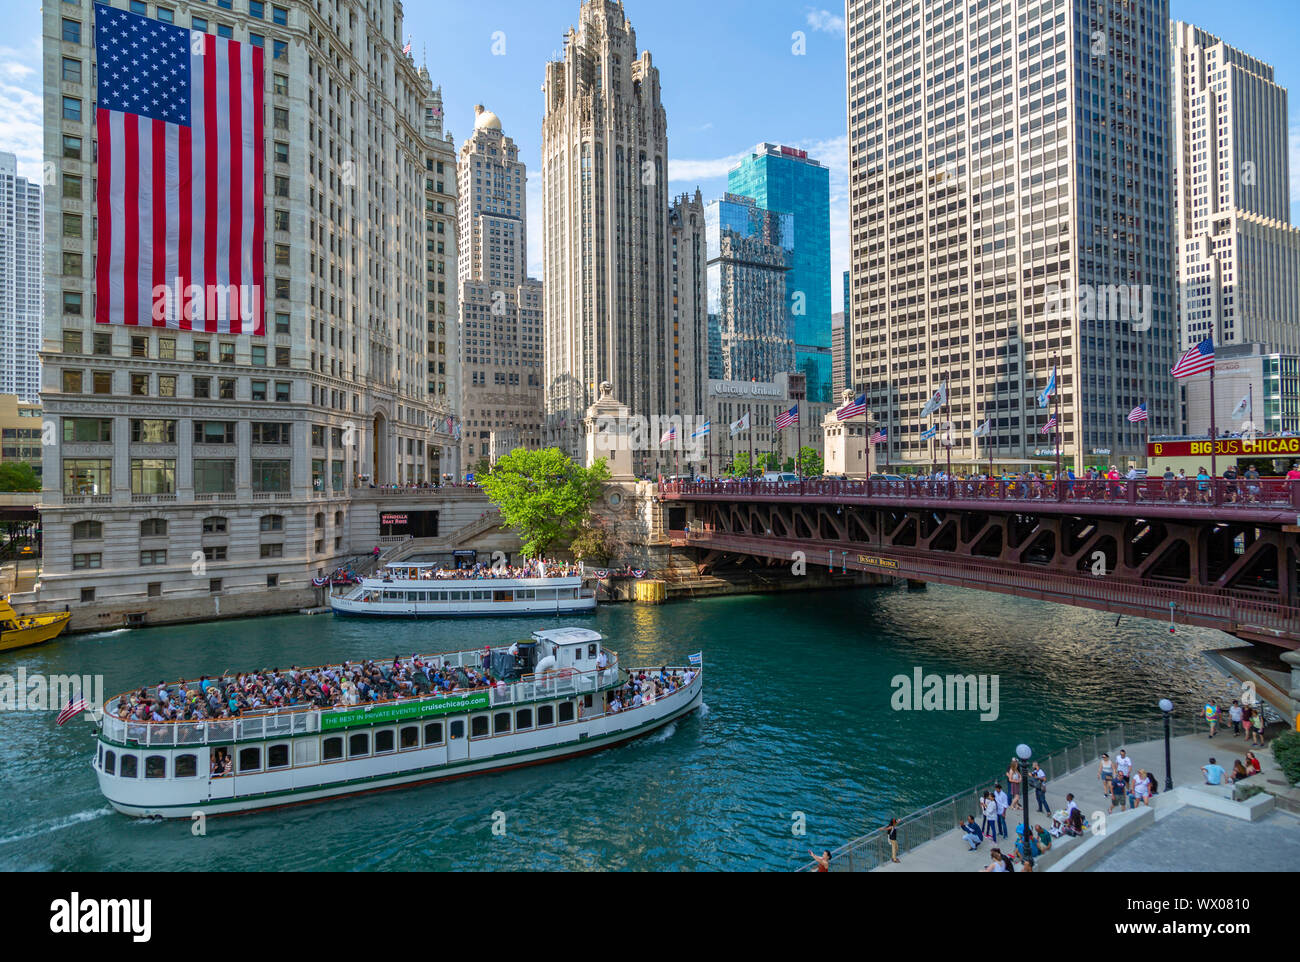 View of American flag on the Wrigley Building and Chicago River, Chicago, Illinois, United States of America, North America Stock Photo